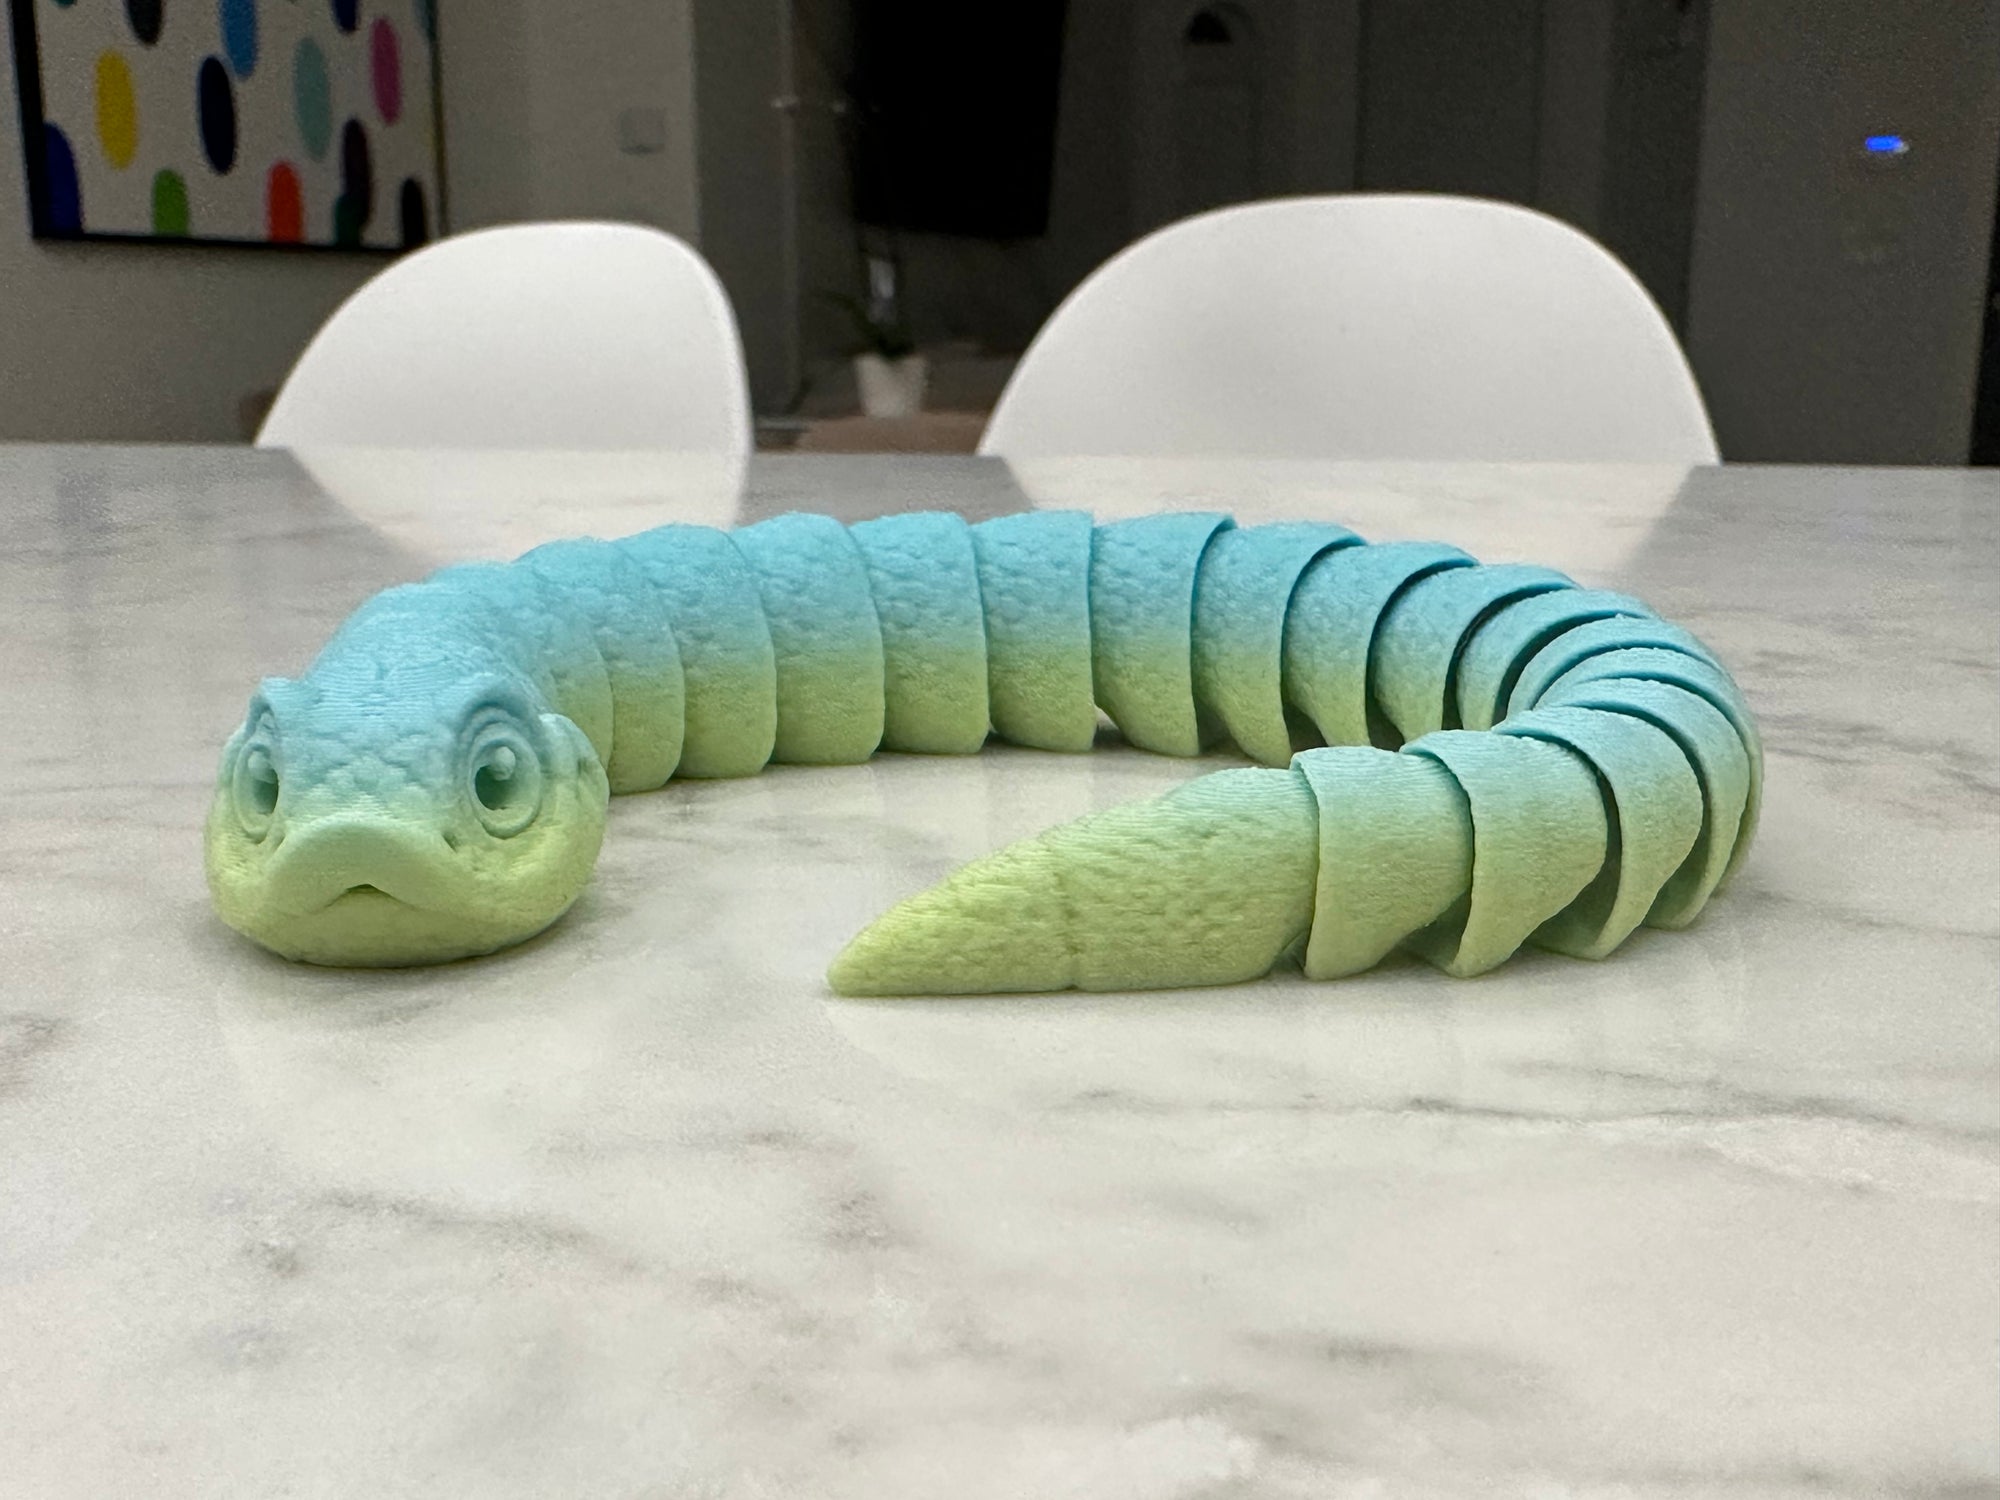 3D Printed Hognose Snake - Articulating, Lifelike Reptile Model - Unique Home Decor - Perfect Gift for Snake Lovers